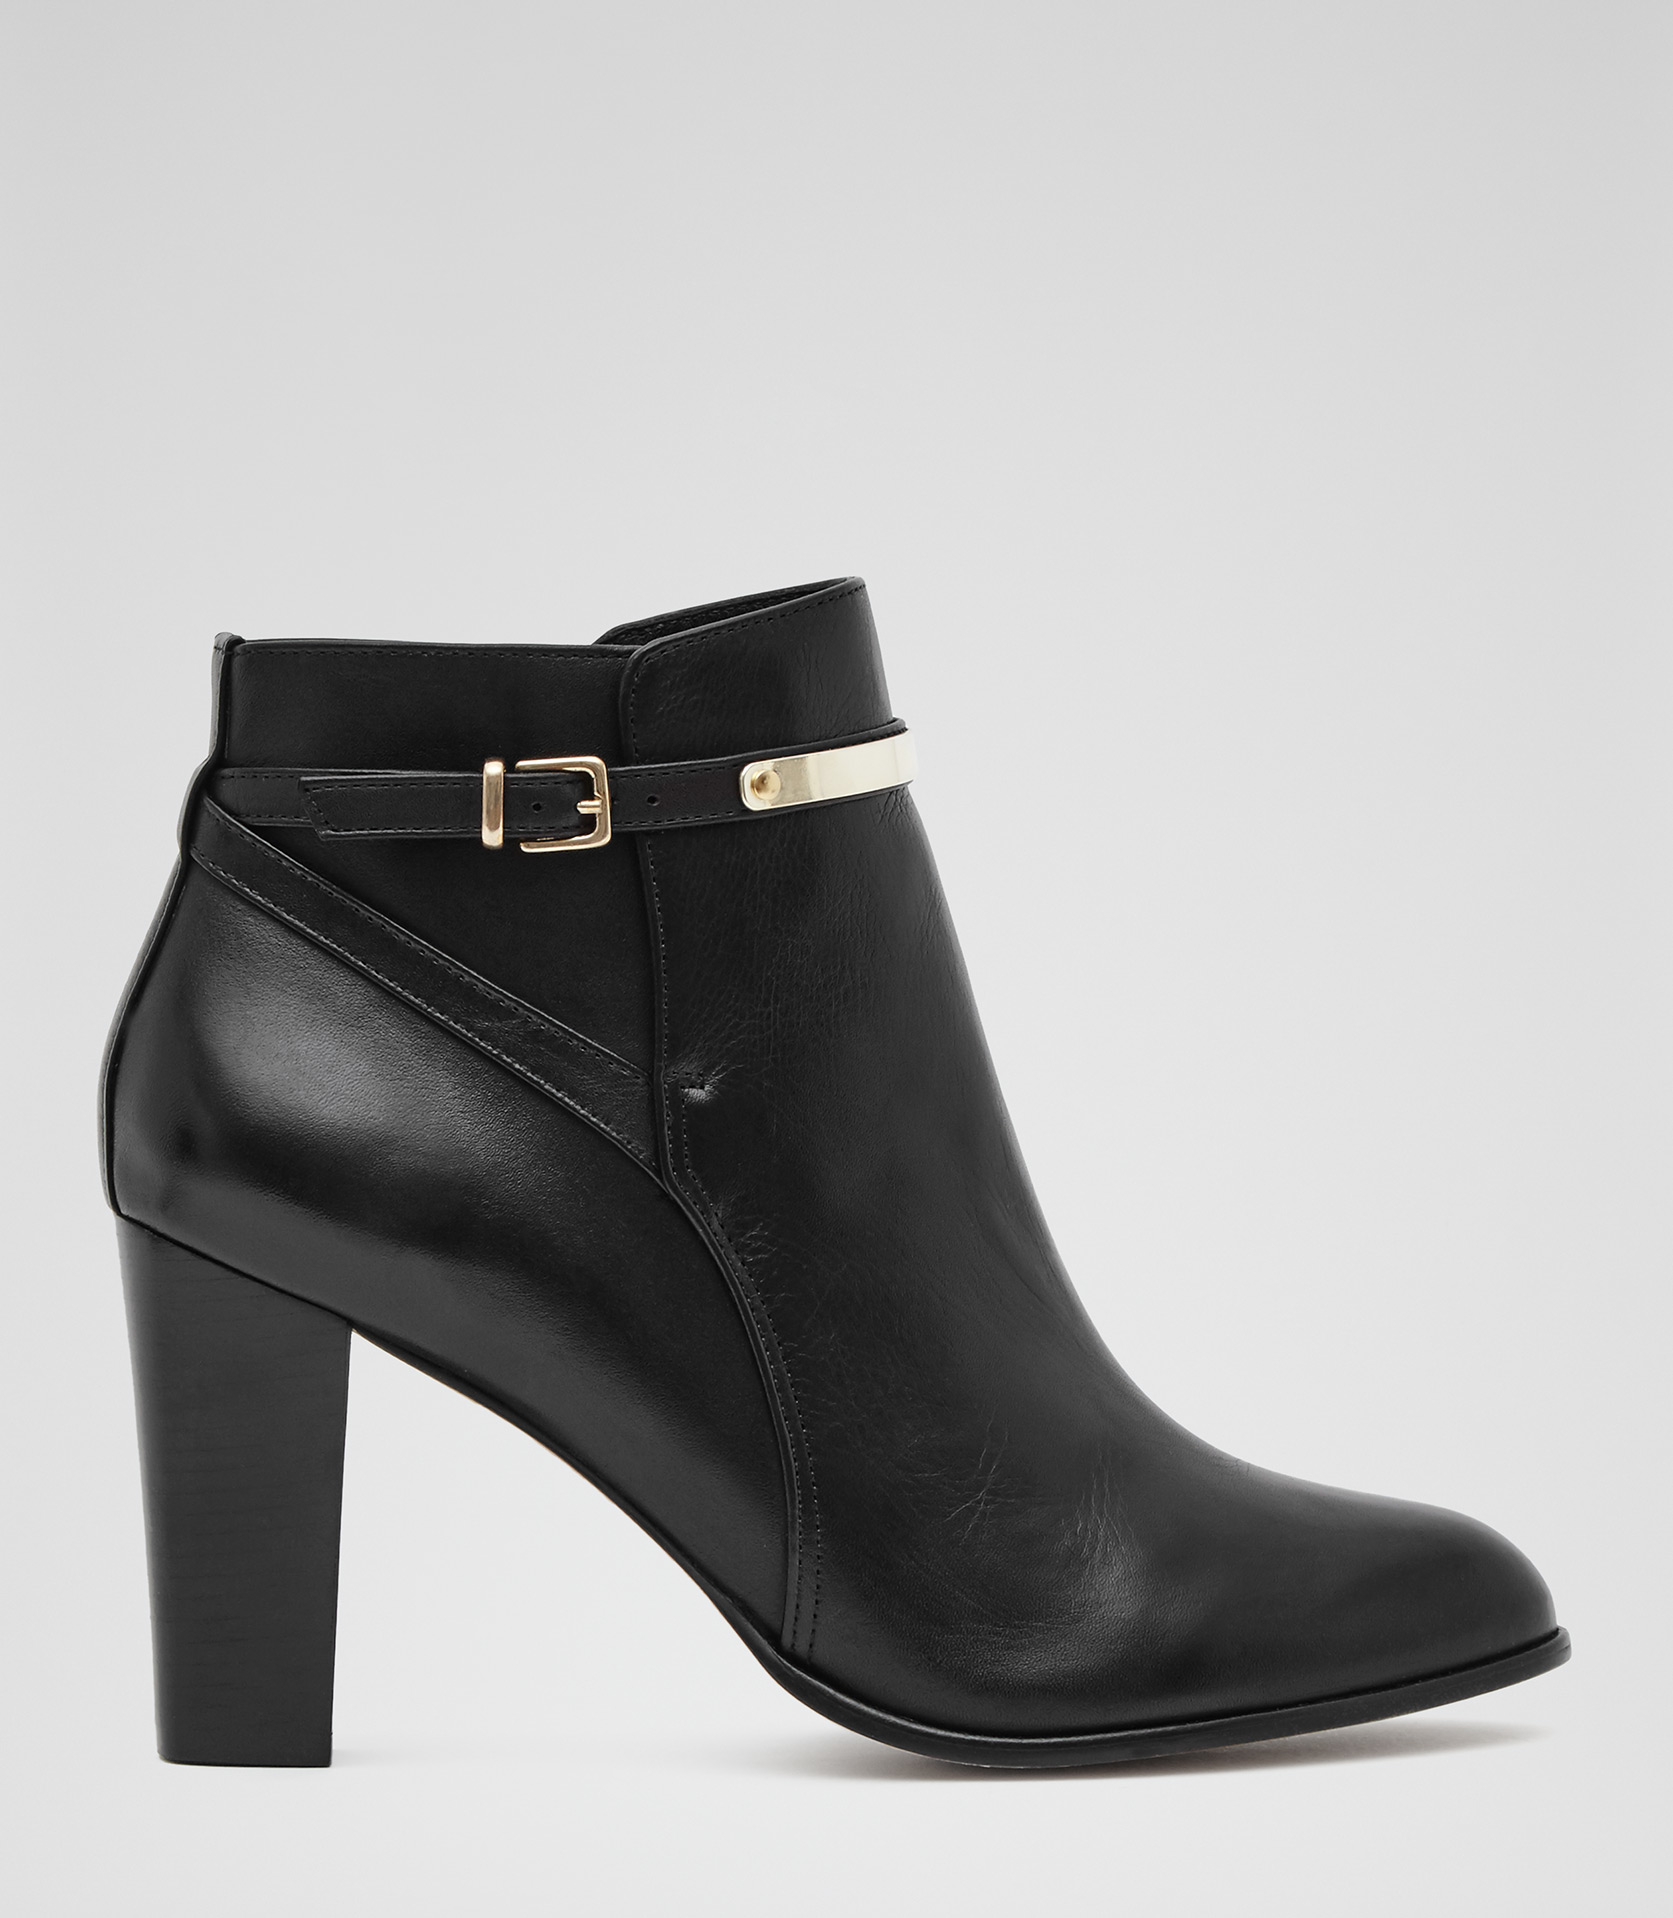 Lyst - Reiss Mia Ankle-strap Leather Boots in Black